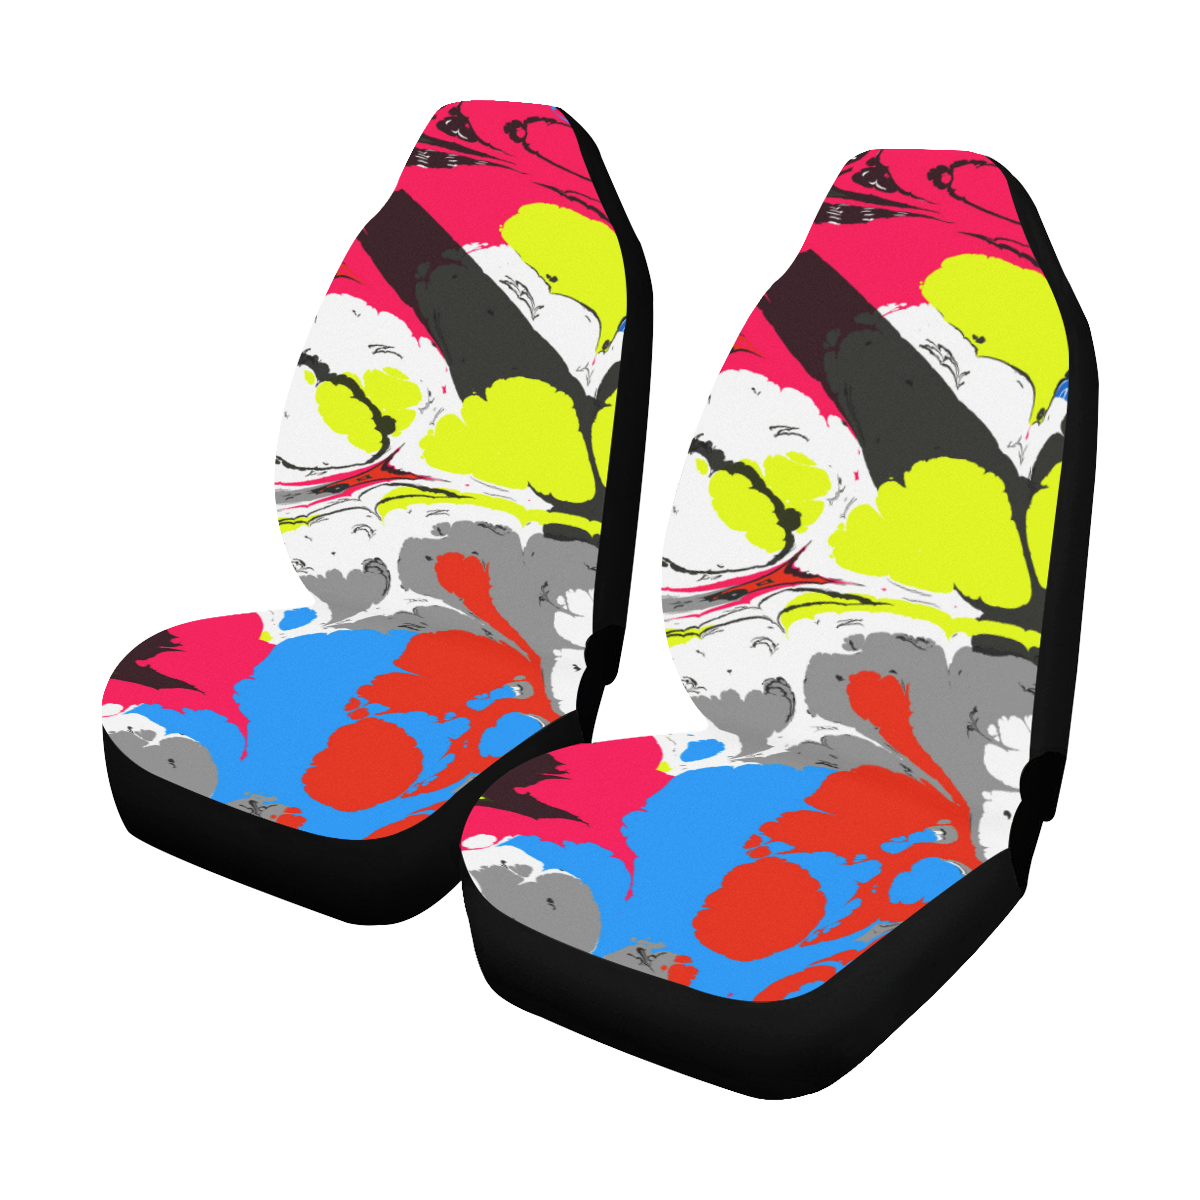 Colorful distorted shapes2 Car Seat Covers (Set of 2)